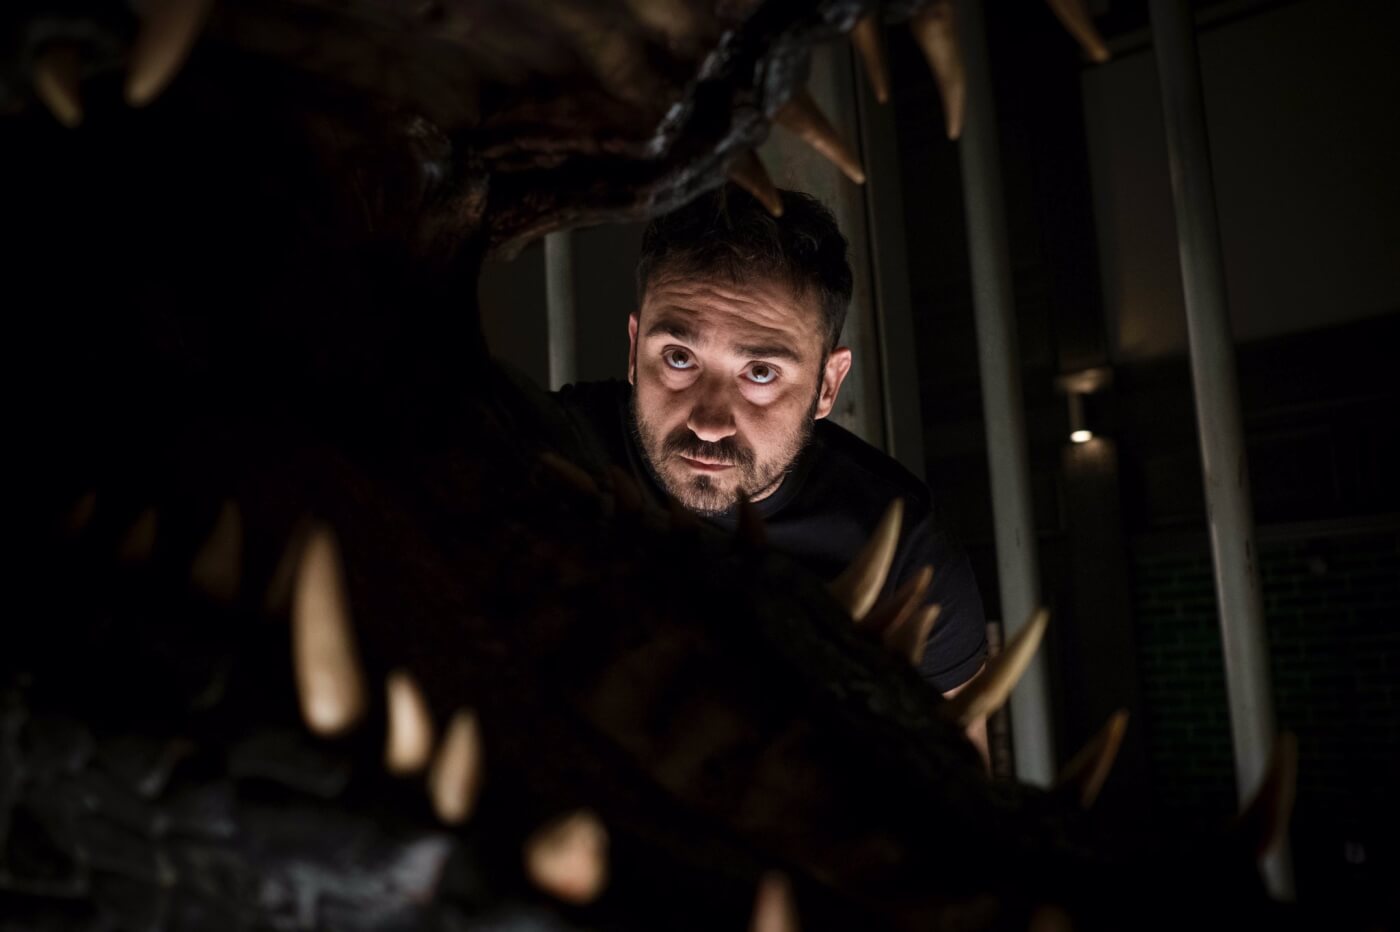 New official picture teases Jurassic World Fallen Kingdom dinosaur – could it be the recently trademarked “Indoraptor”?